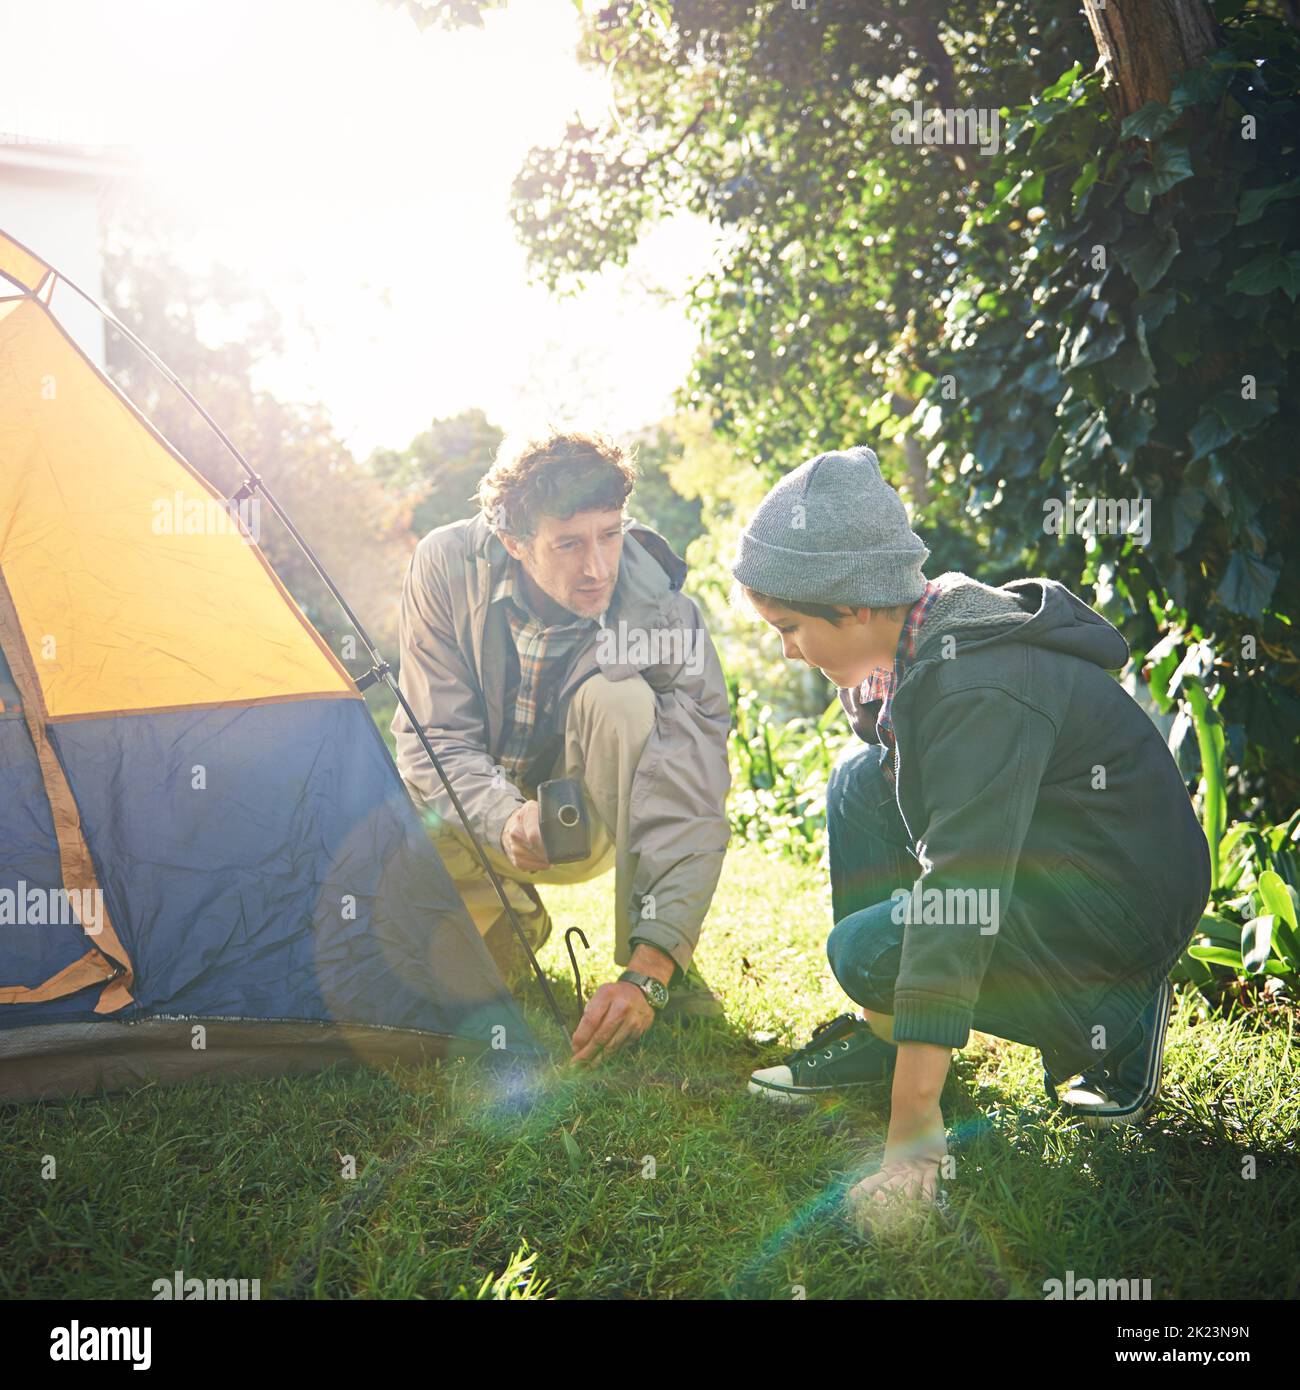 Roughing it in the wild with his lil dude. a father and his young son putting up their tent. Stock Photo